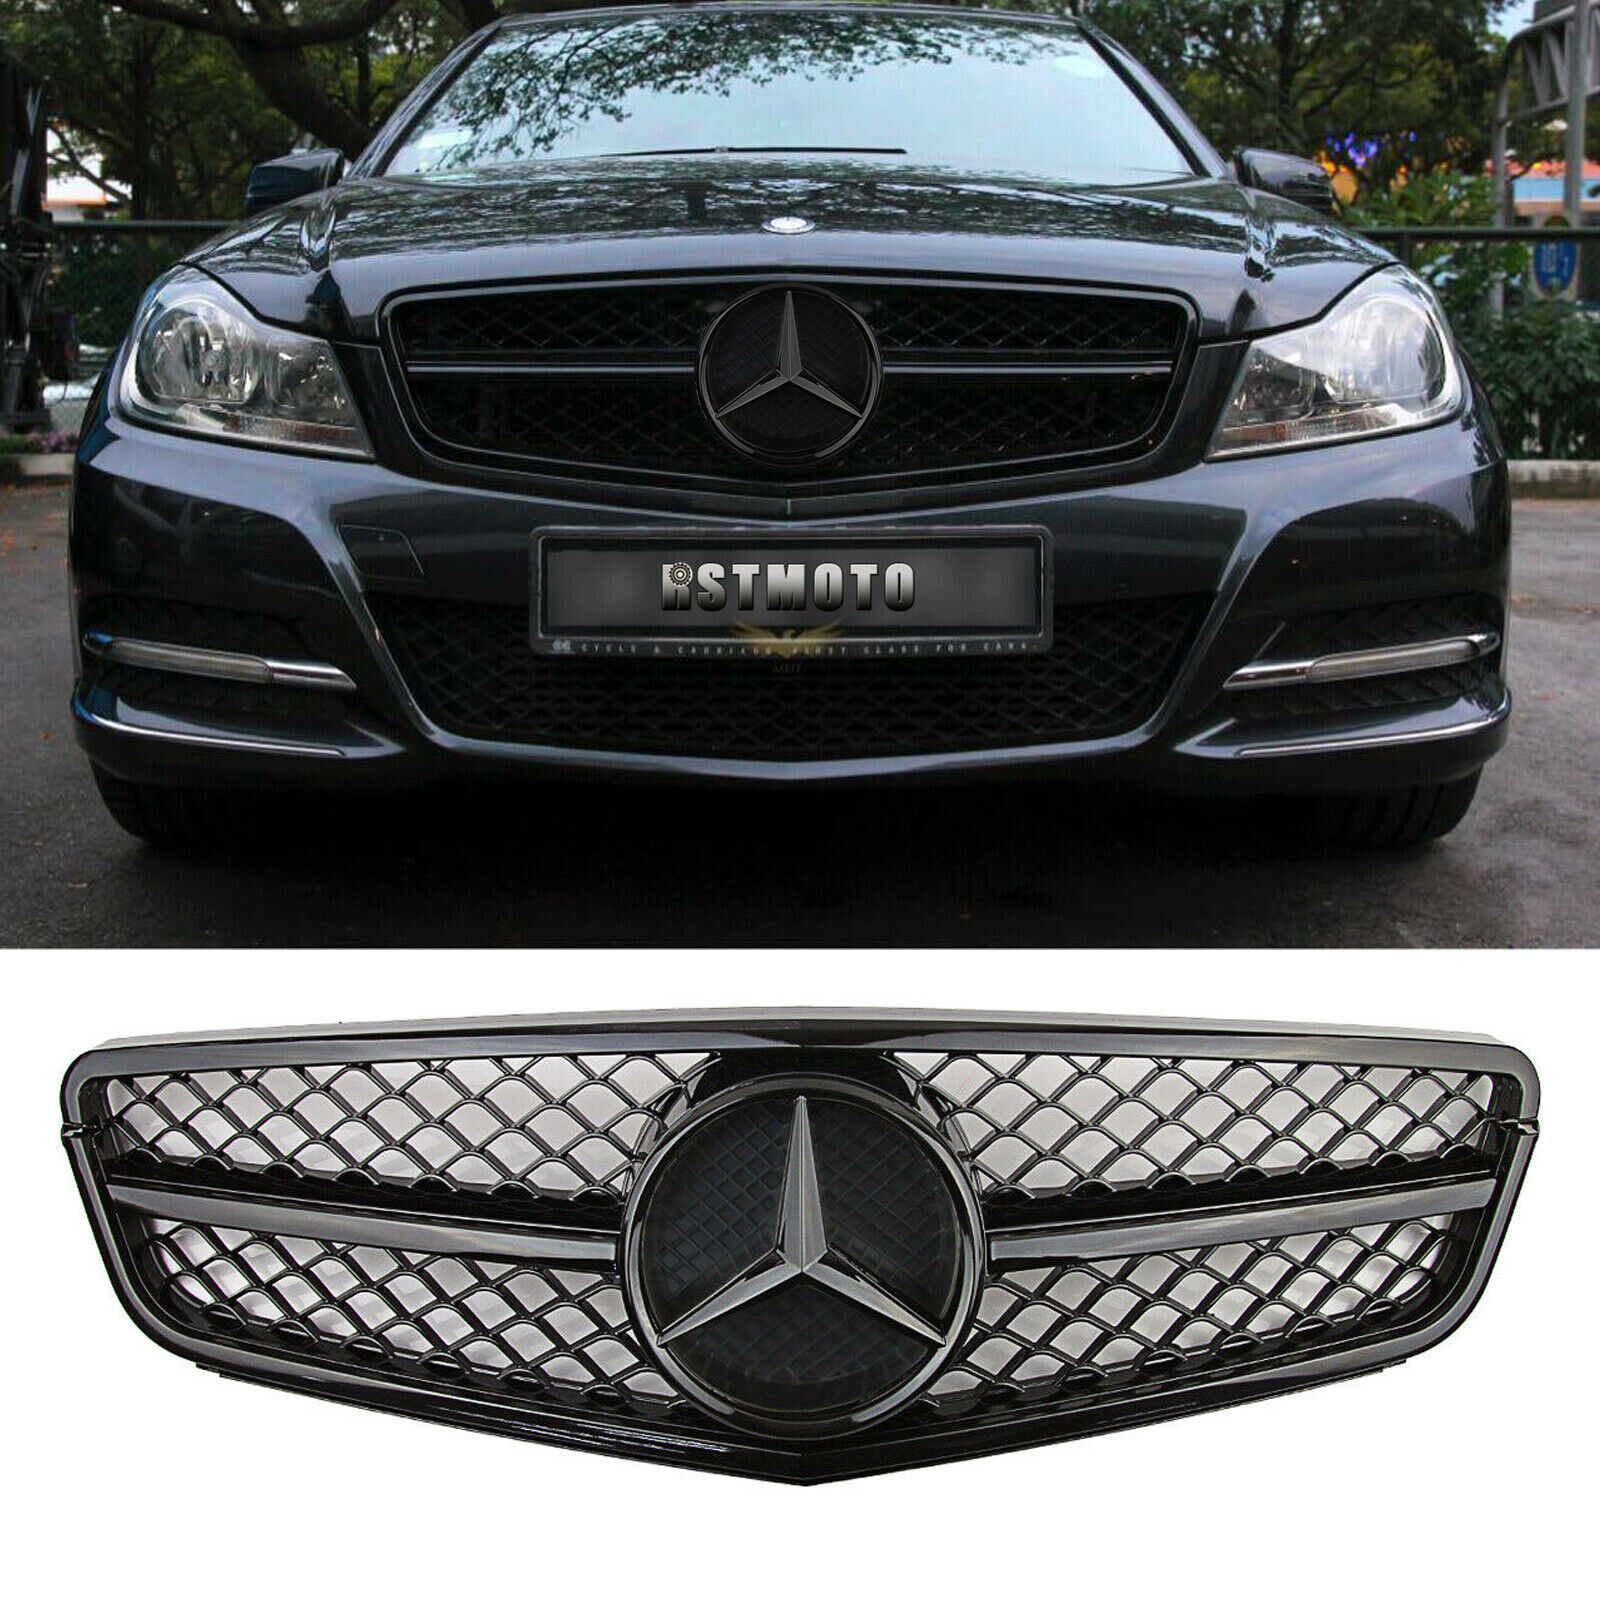 AMG Style Black Grille Grill w/Star For Mercedes Benz W204 C250 C300 C350 08-13